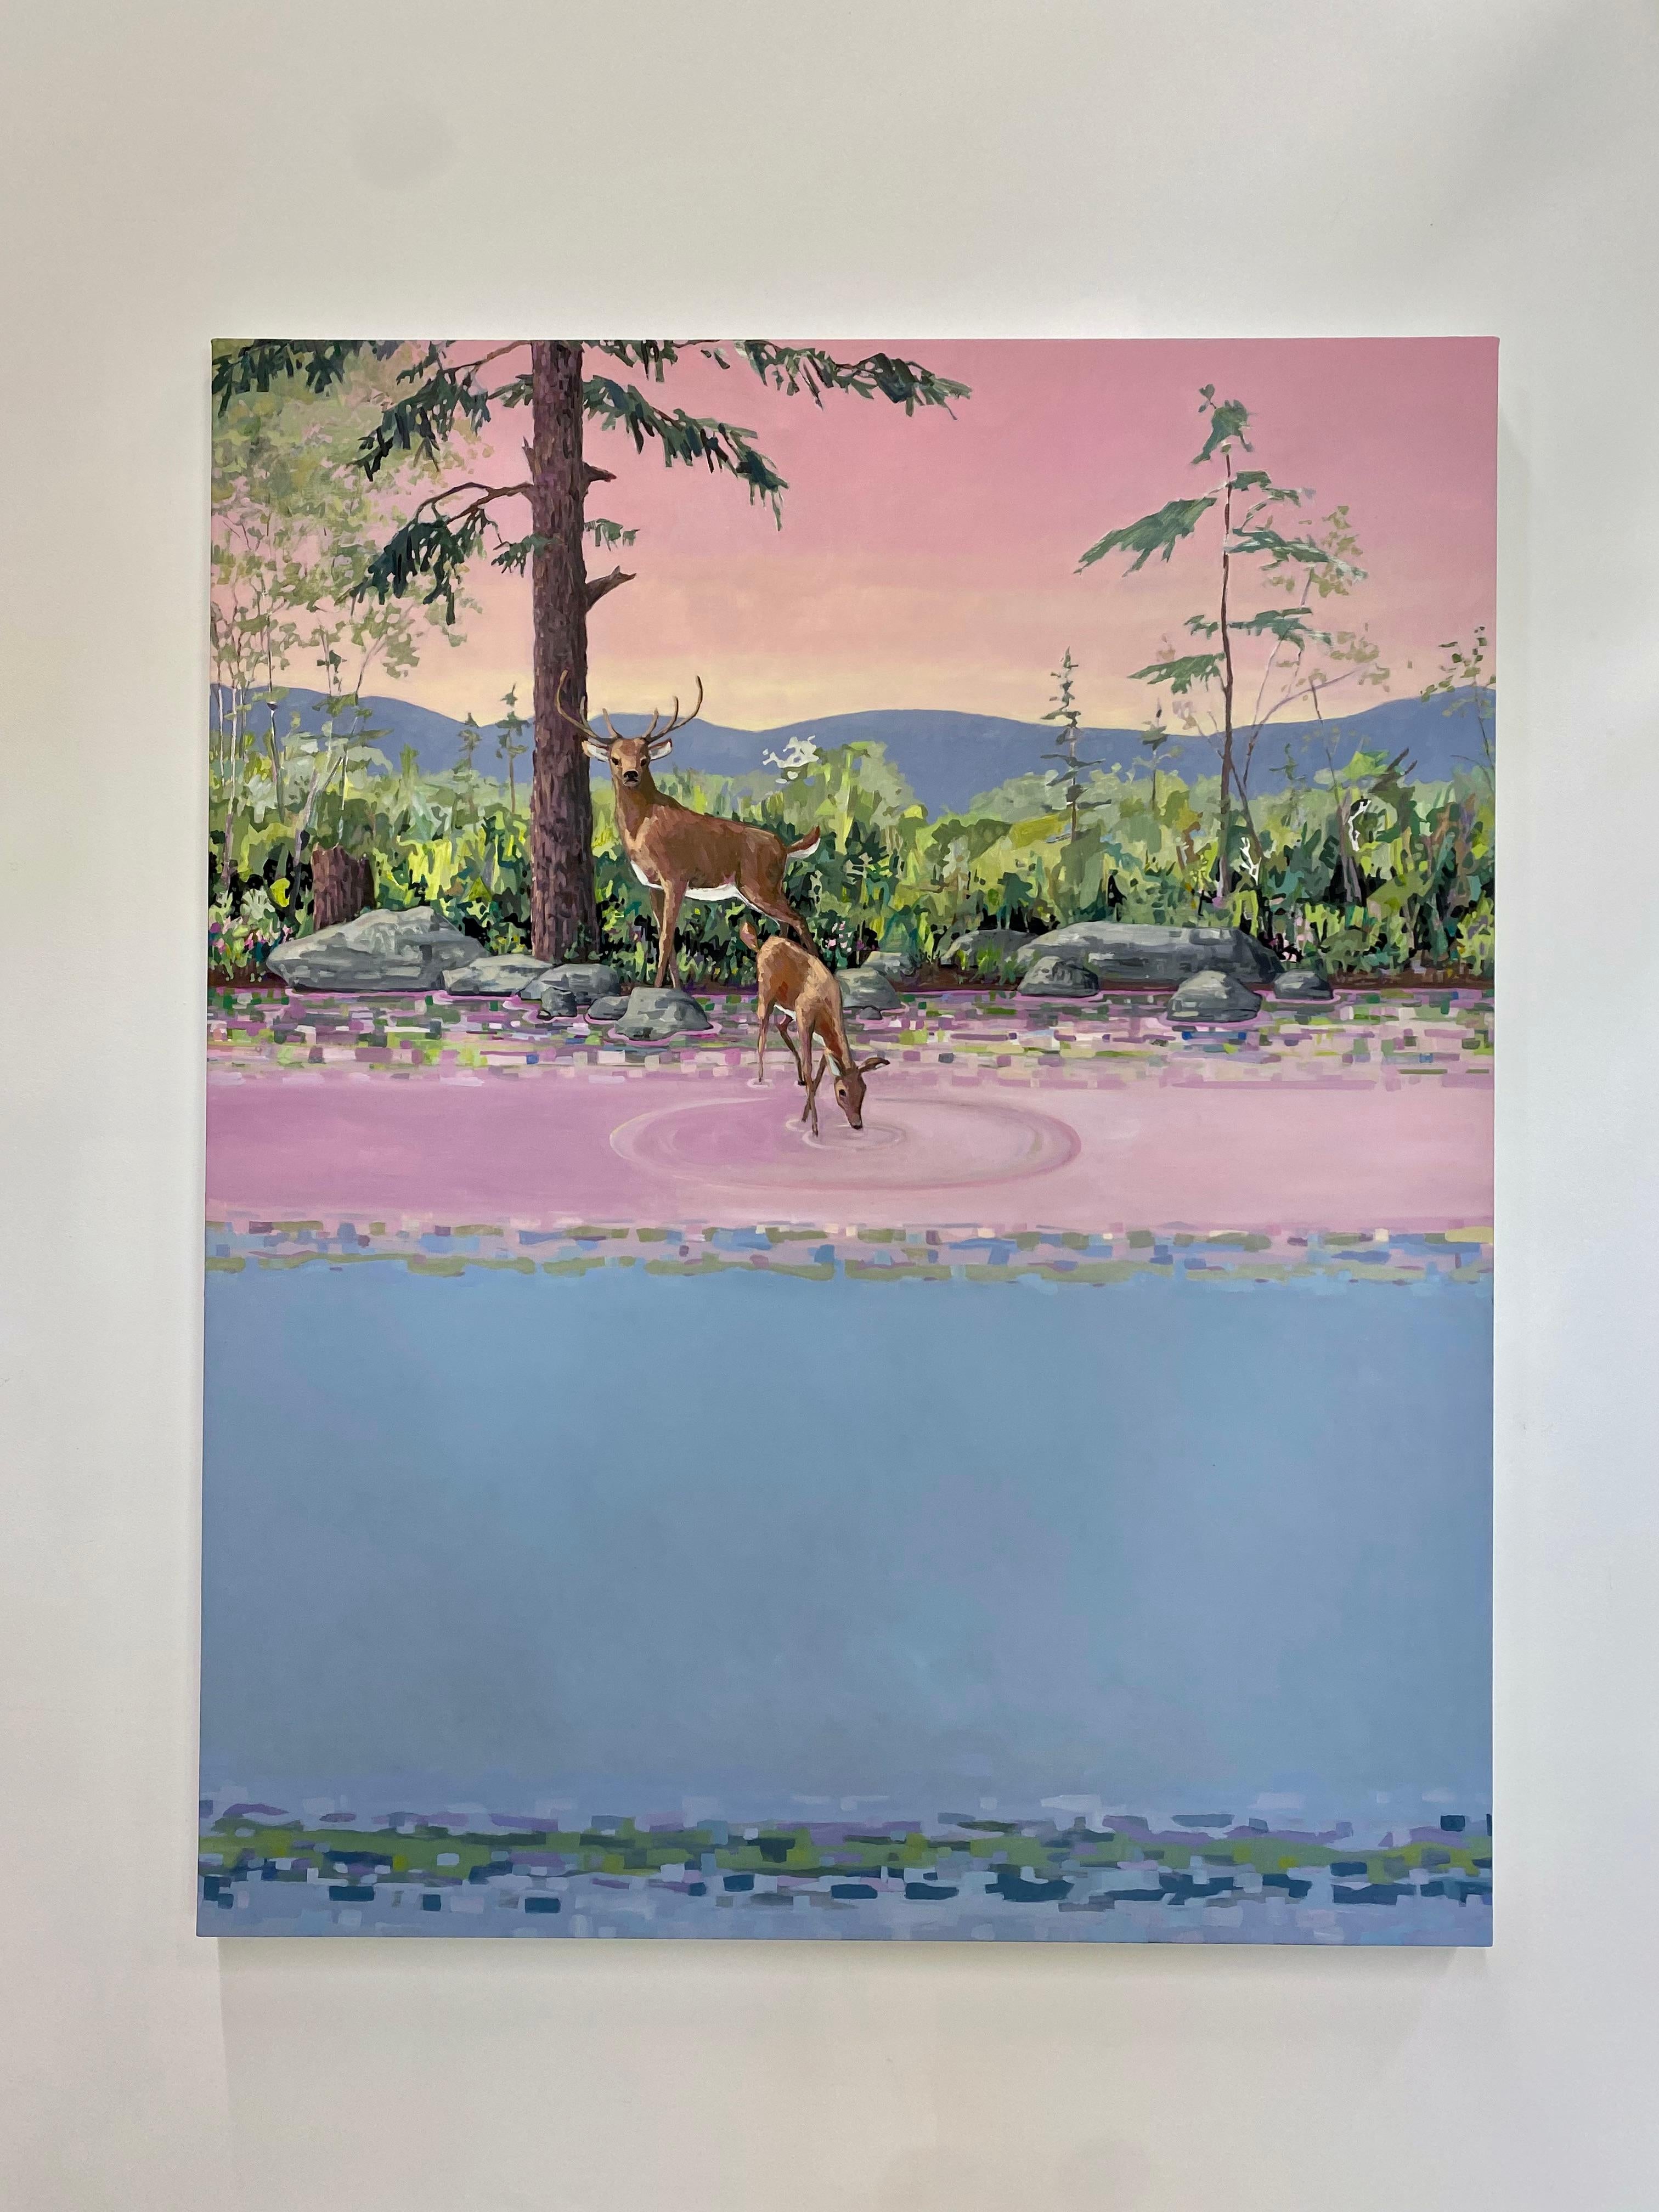 Pink Doe and Stag, Two Deer, Pink, Blue Water, Mountains, Lake, Pine Trees - Painting by KK Kozik